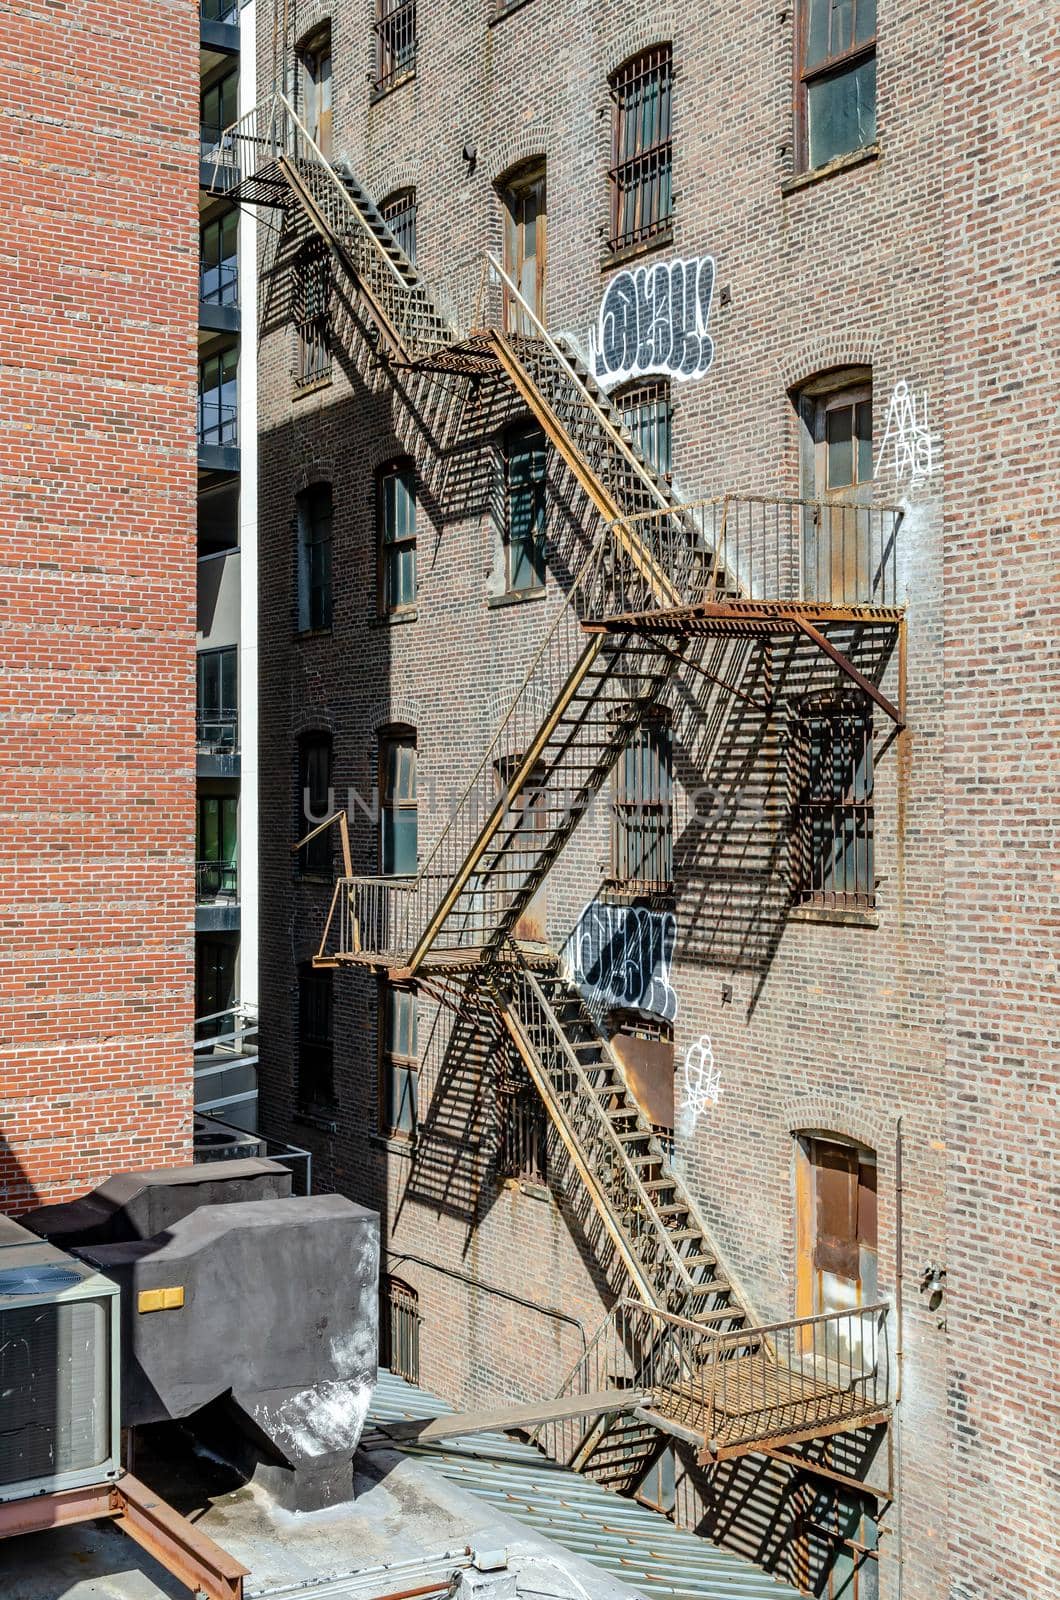 Escape stair at a Residential Building in Chelsea, New York City by bildgigant